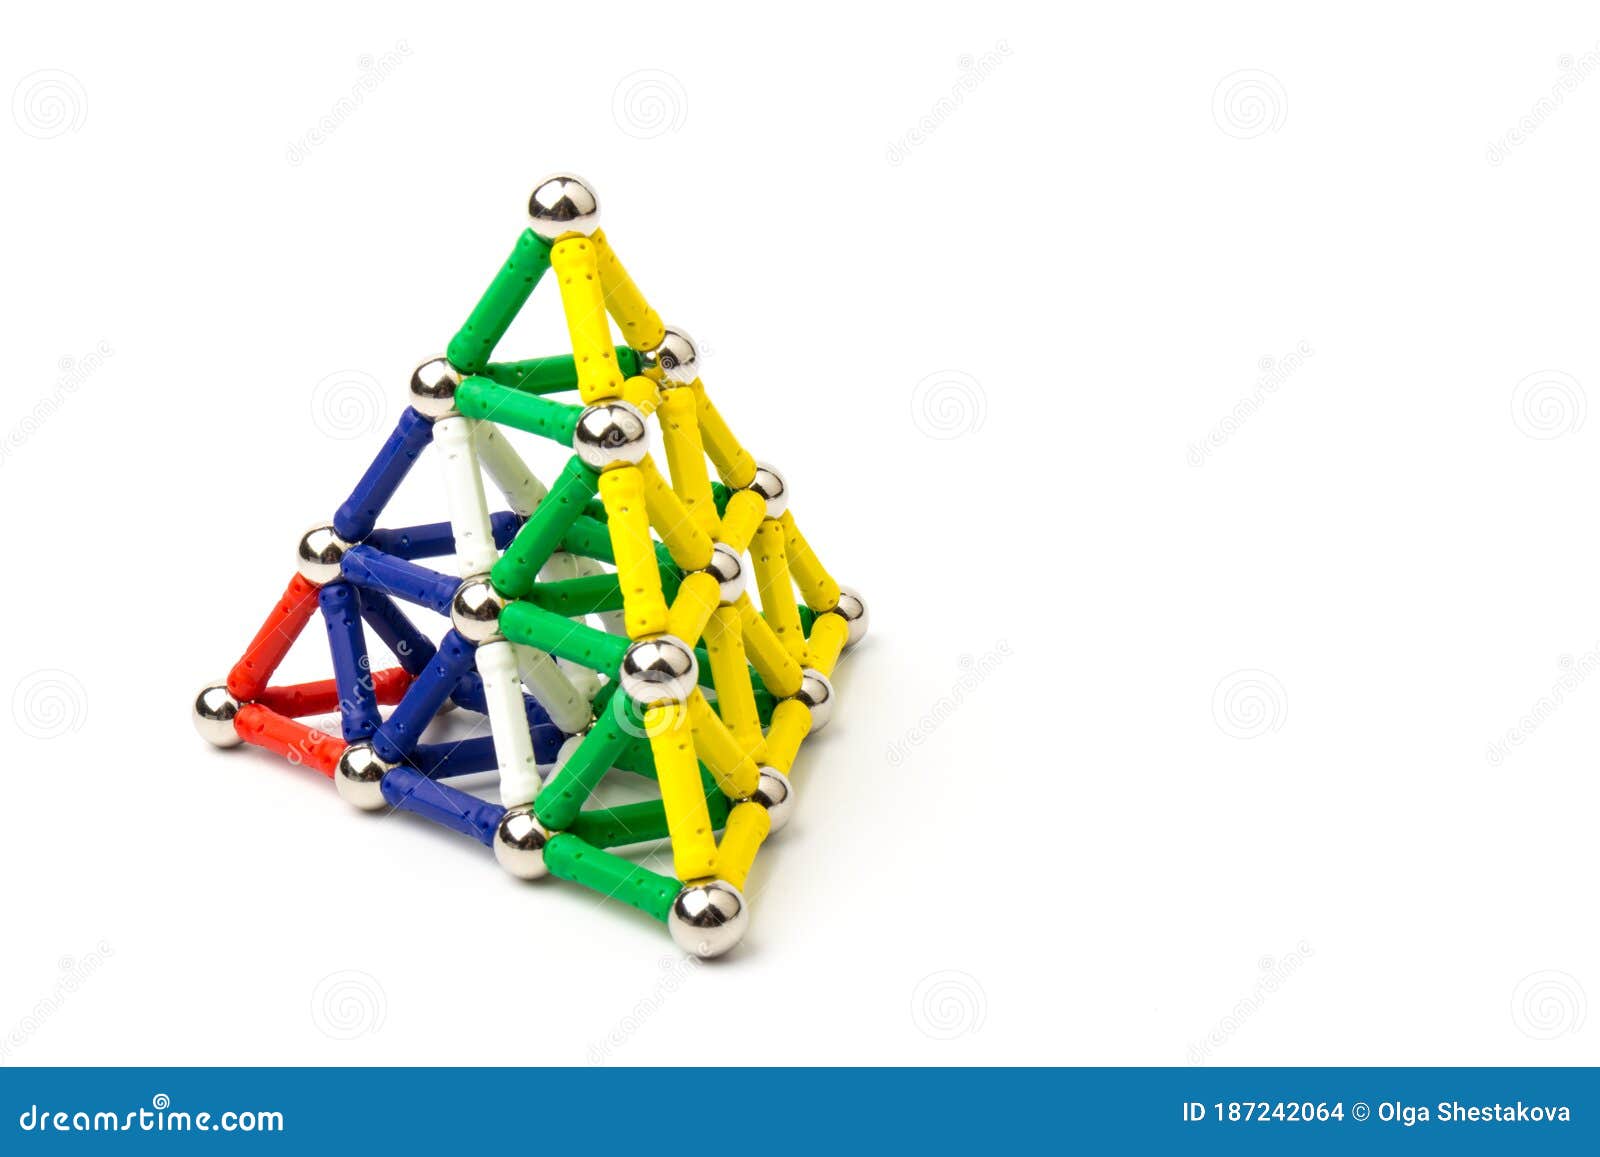 Multi-colored Figure Magnetic Balls and Sticks Stock Photo - of friendship: 187242064